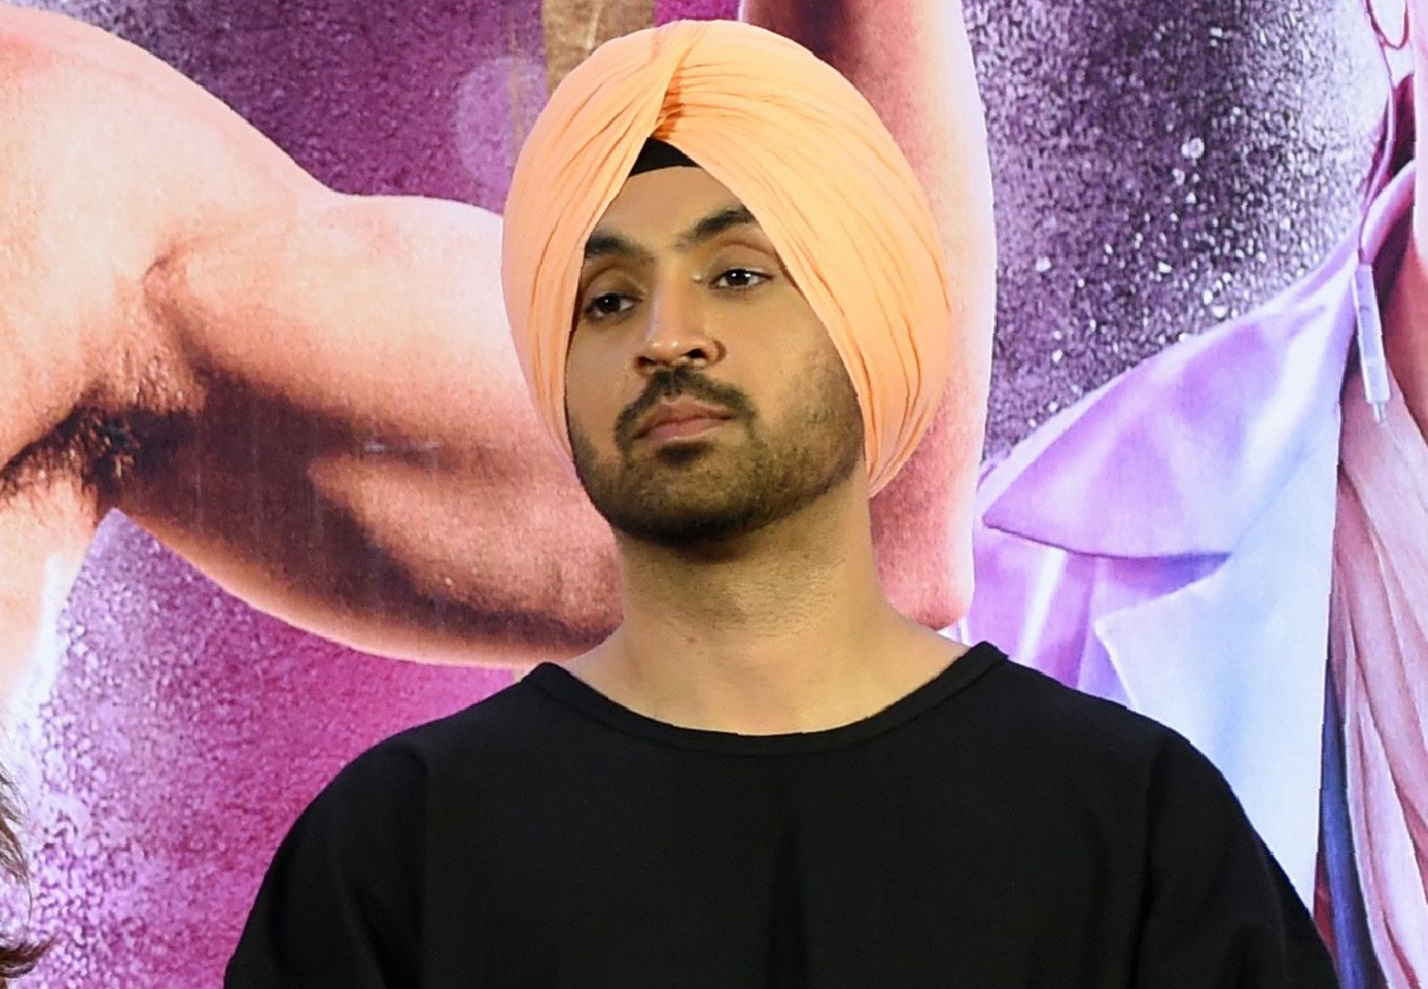 Fila ropes in Diljit Dosanjh as the new face for Motorsport campaign, ET  BrandEquity